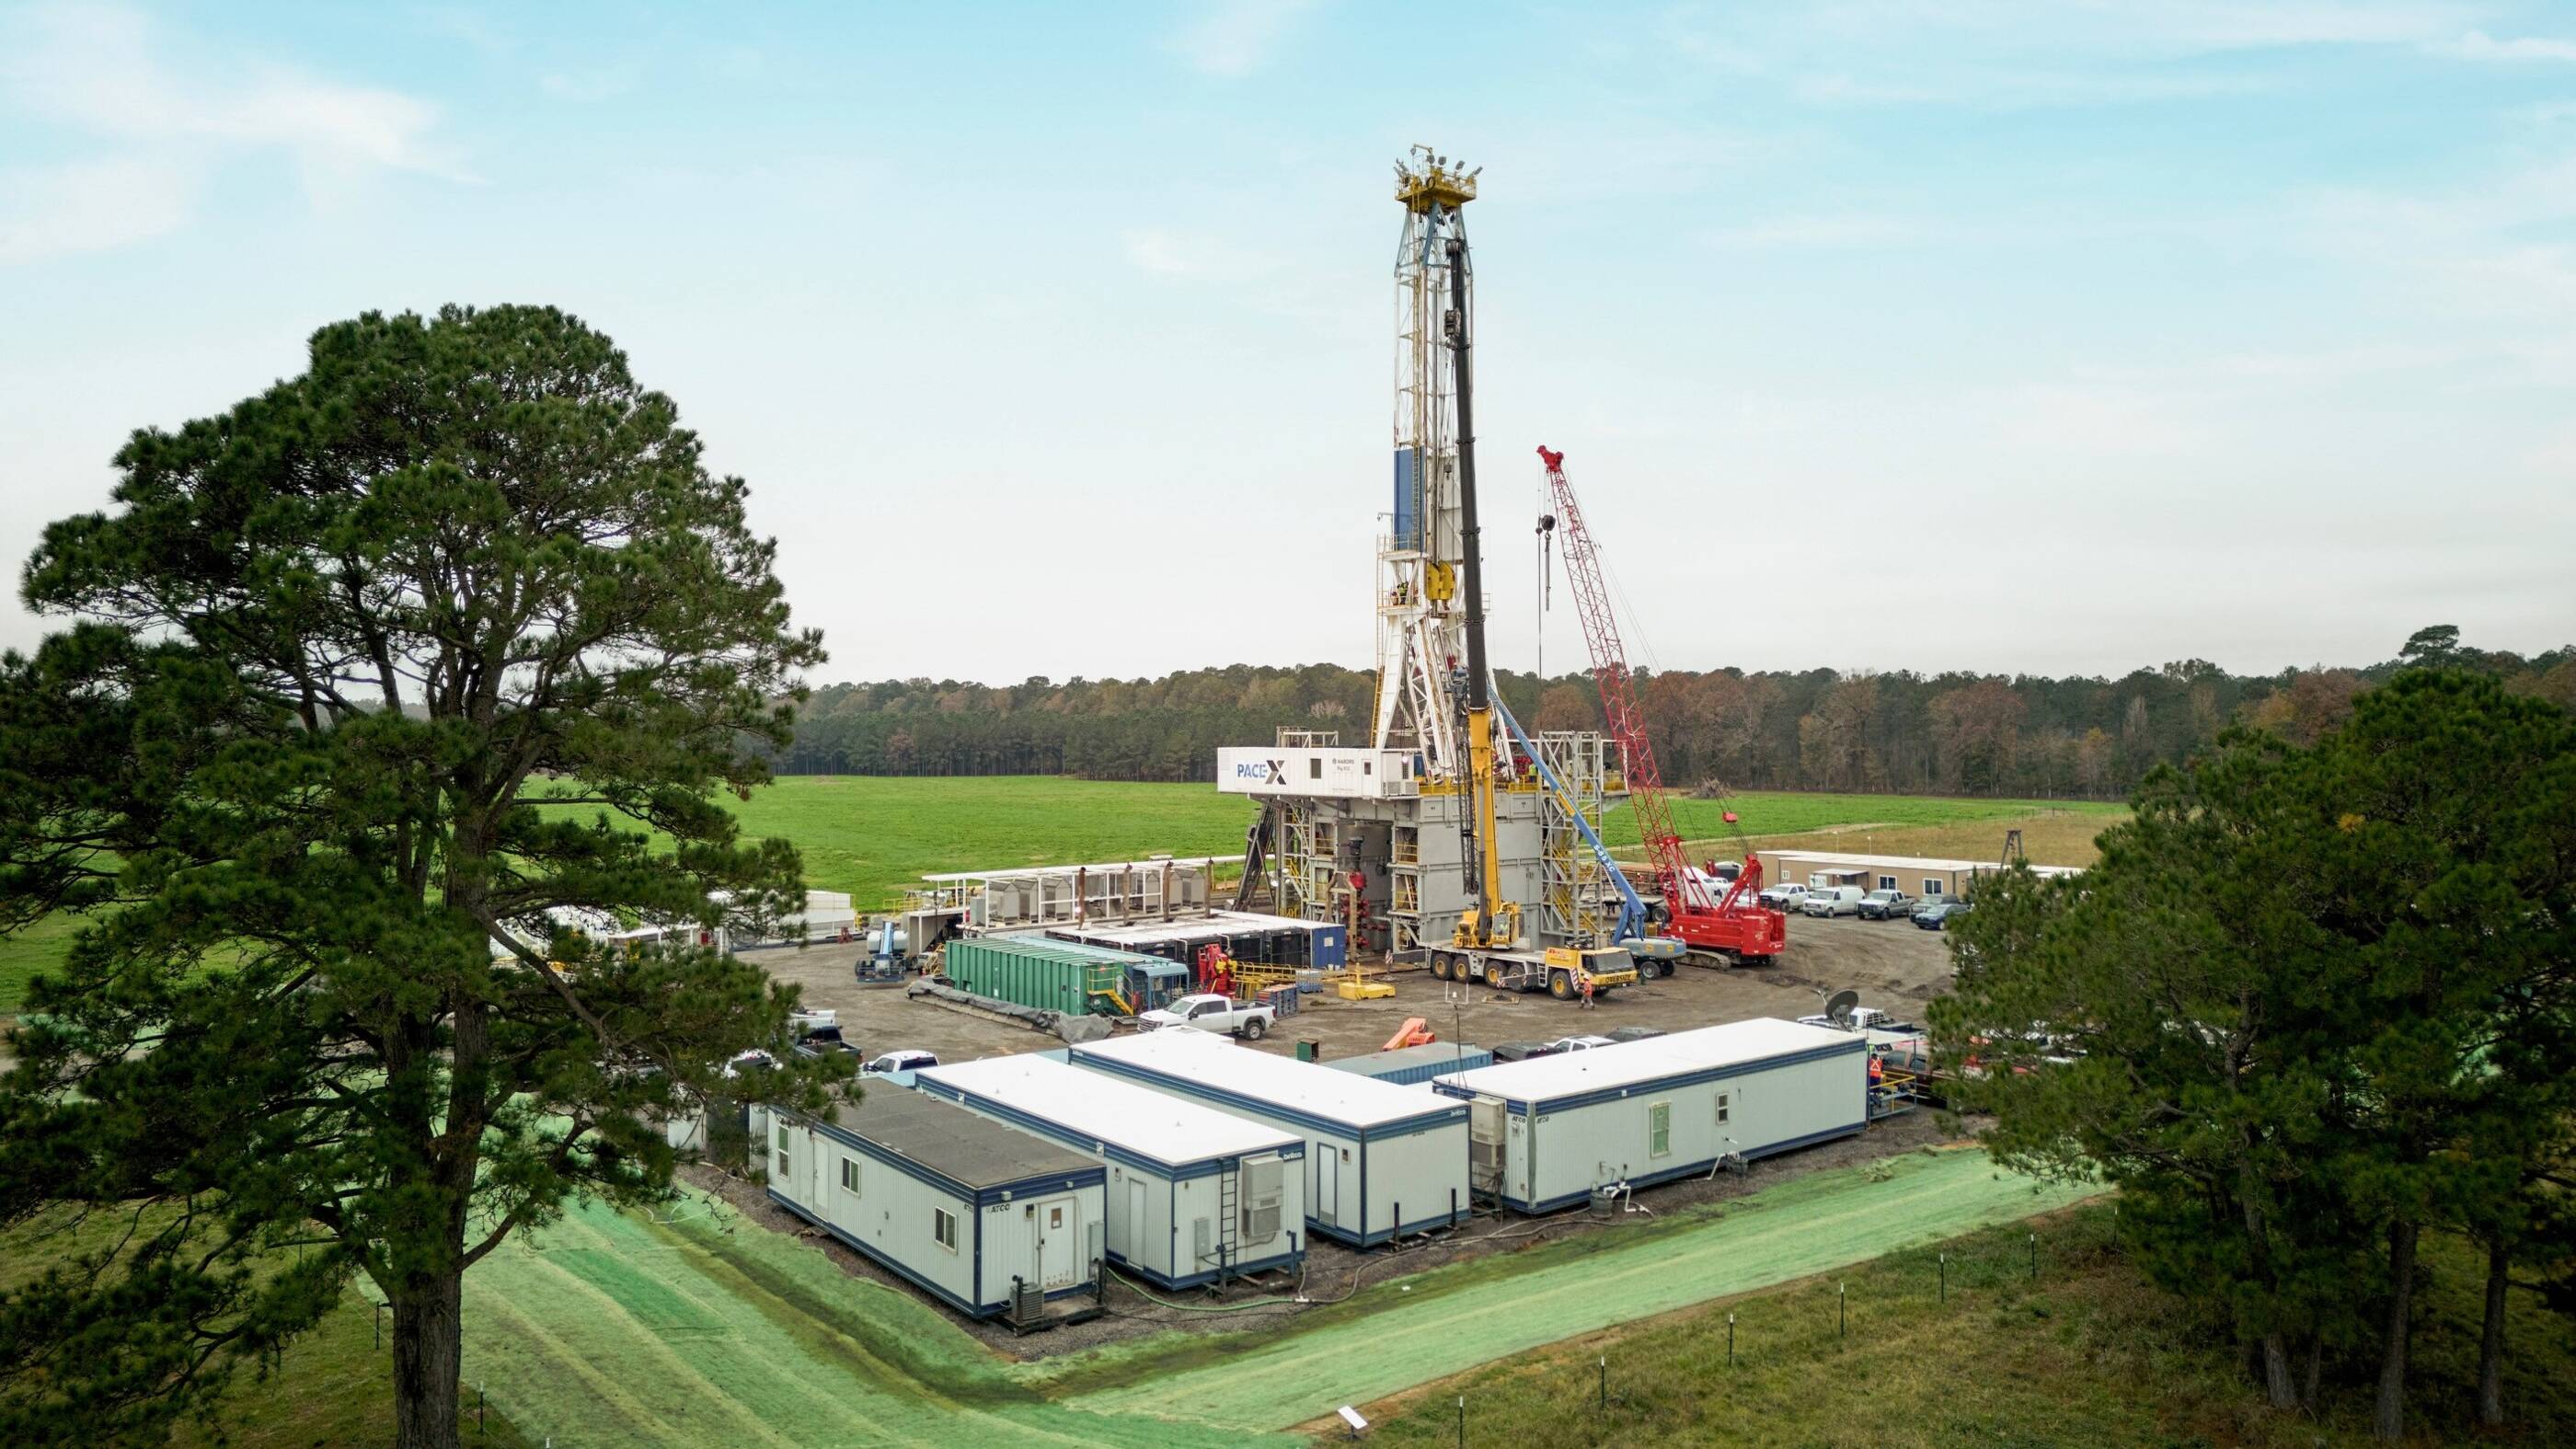 ExxonMobils first lithium rig, part of an appraisal program underway in Arkansas. By 2030, we aim to produce enough lithium to support the manufacture of about 1 million electric vehicles.